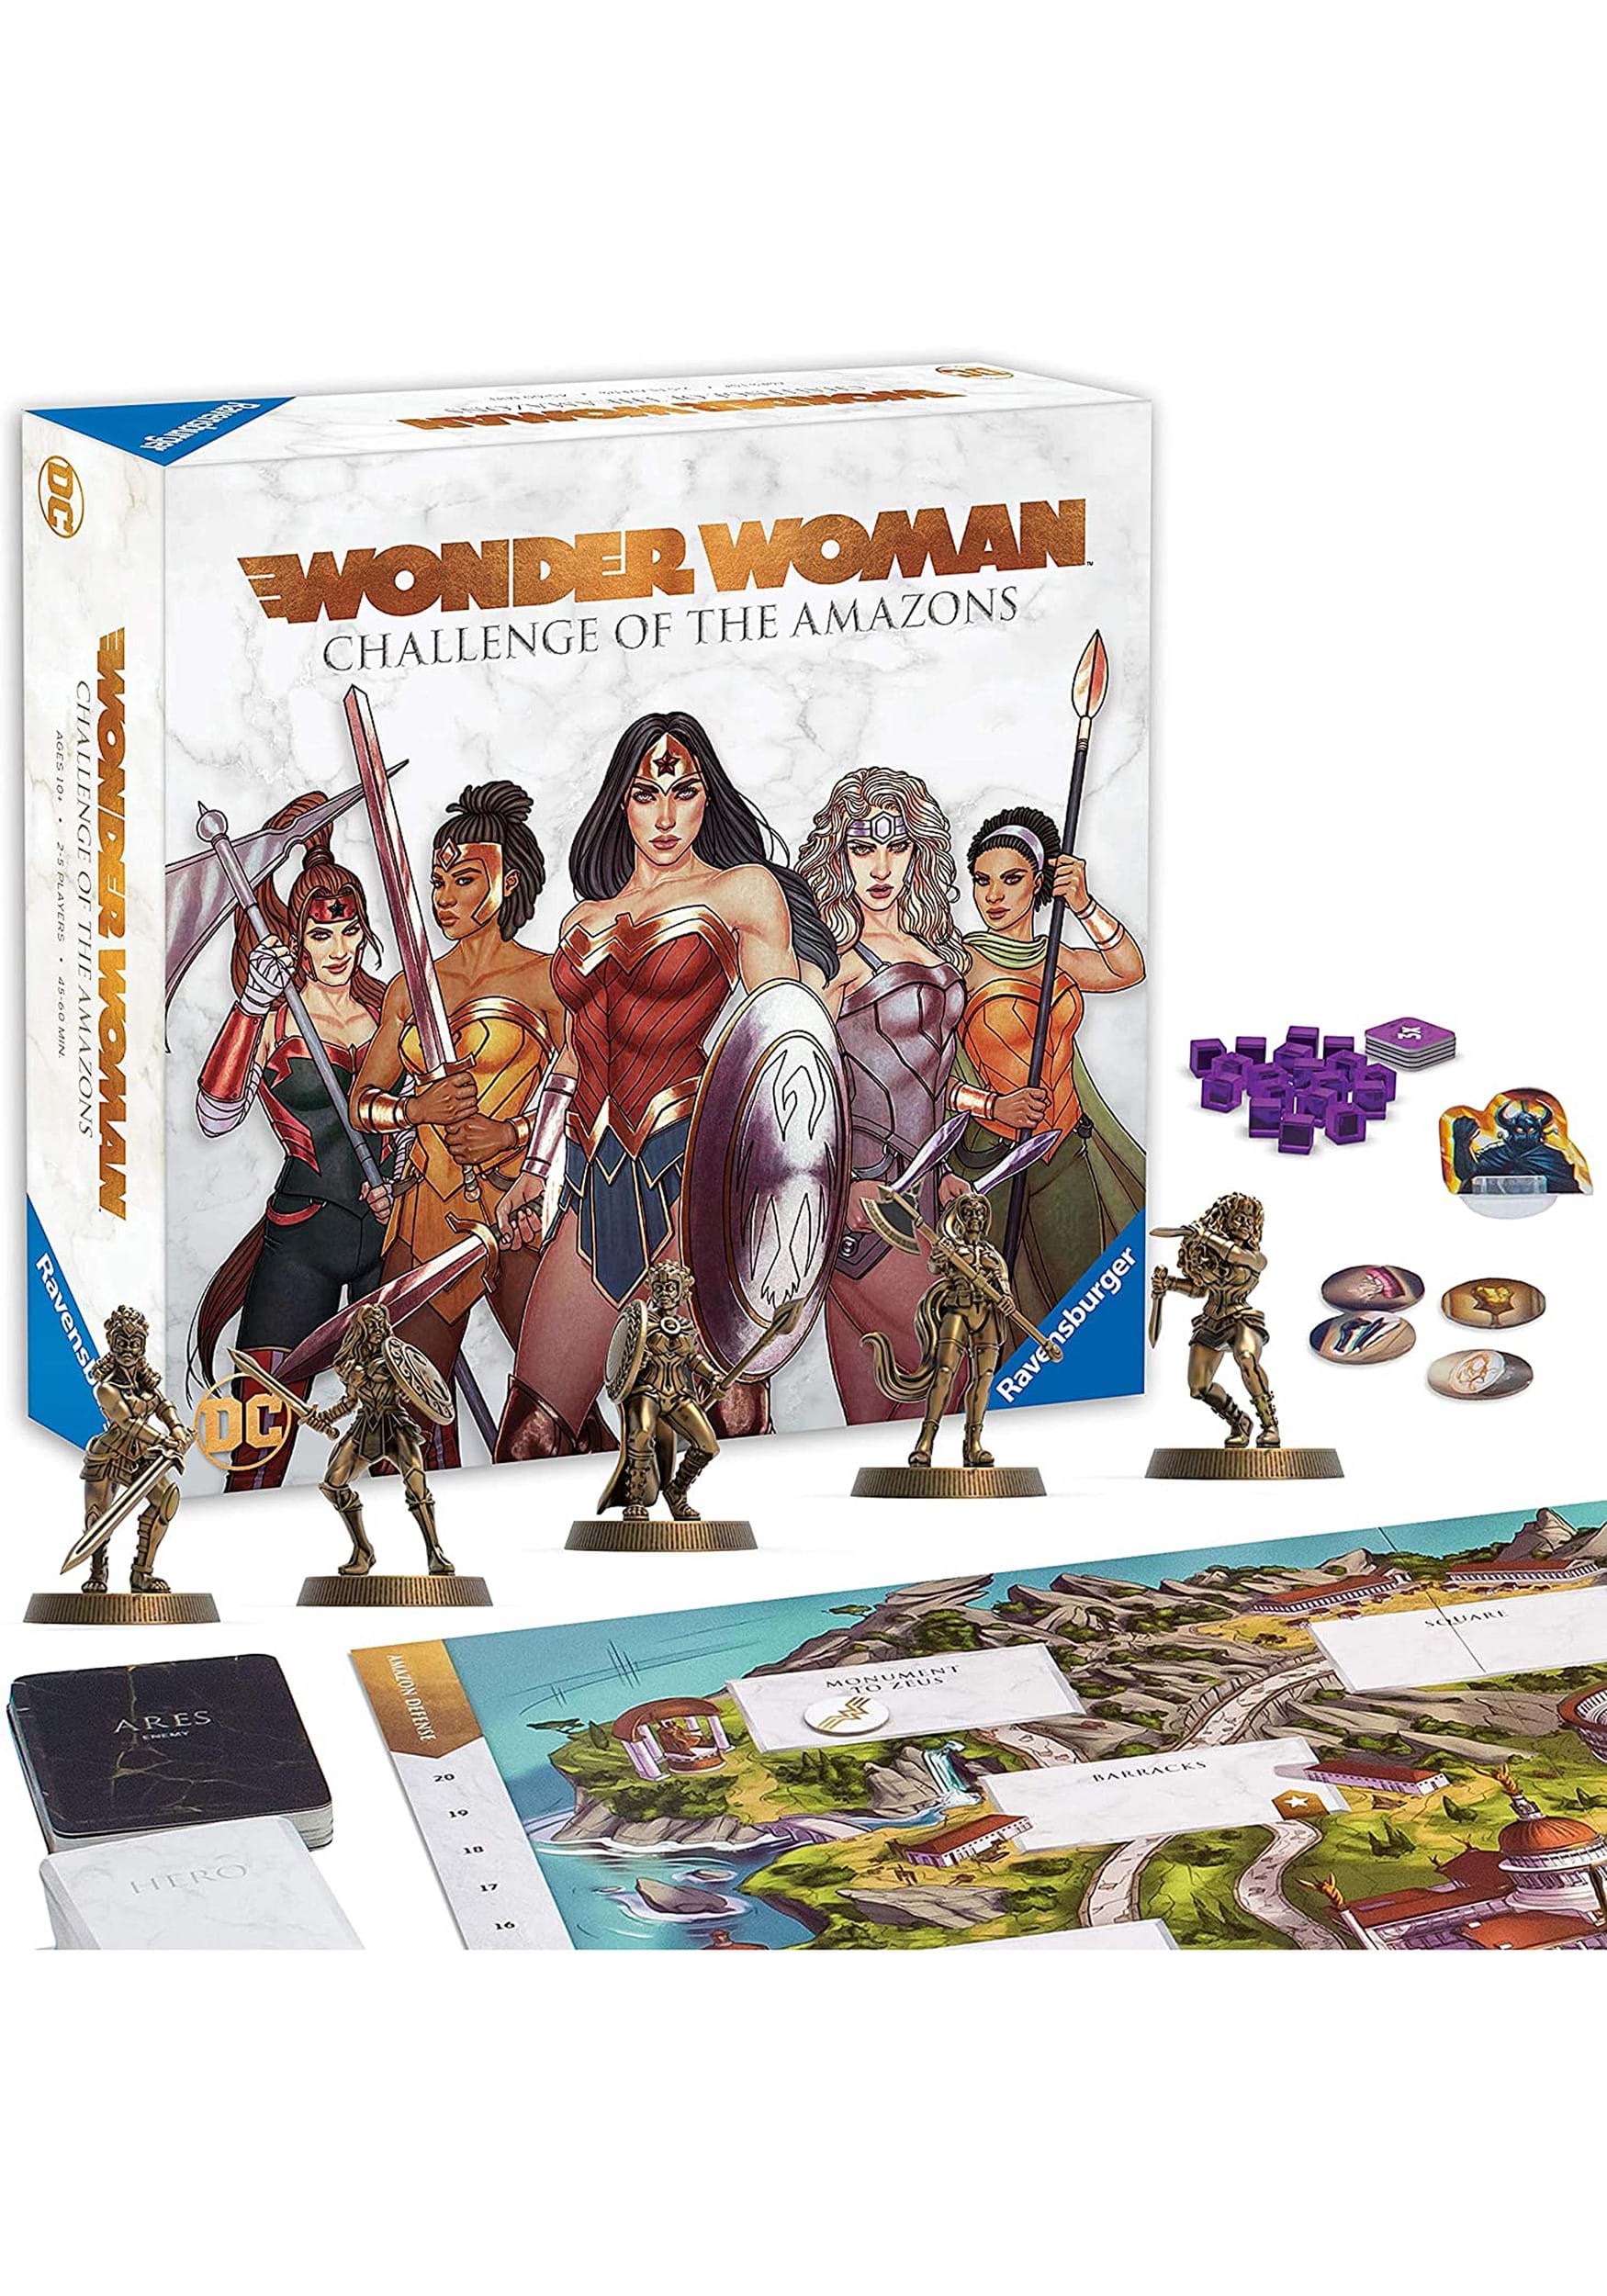 Wonder Woman: Challenge of the Amazons preview image